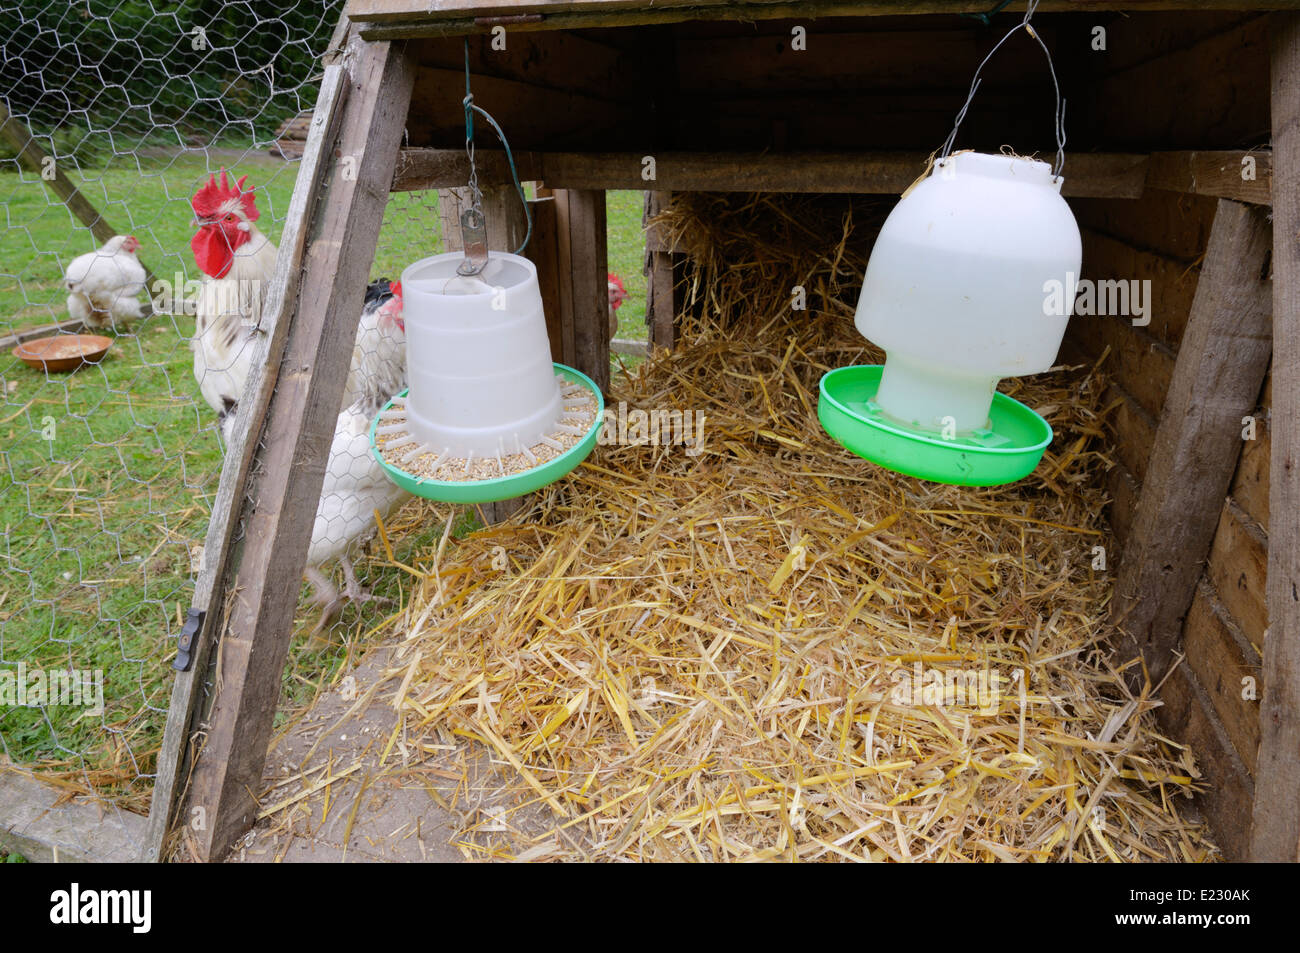 Plastic feeder and drinker hanging in a moveable hen coop or fold unit, Wales, UK Stock Photo